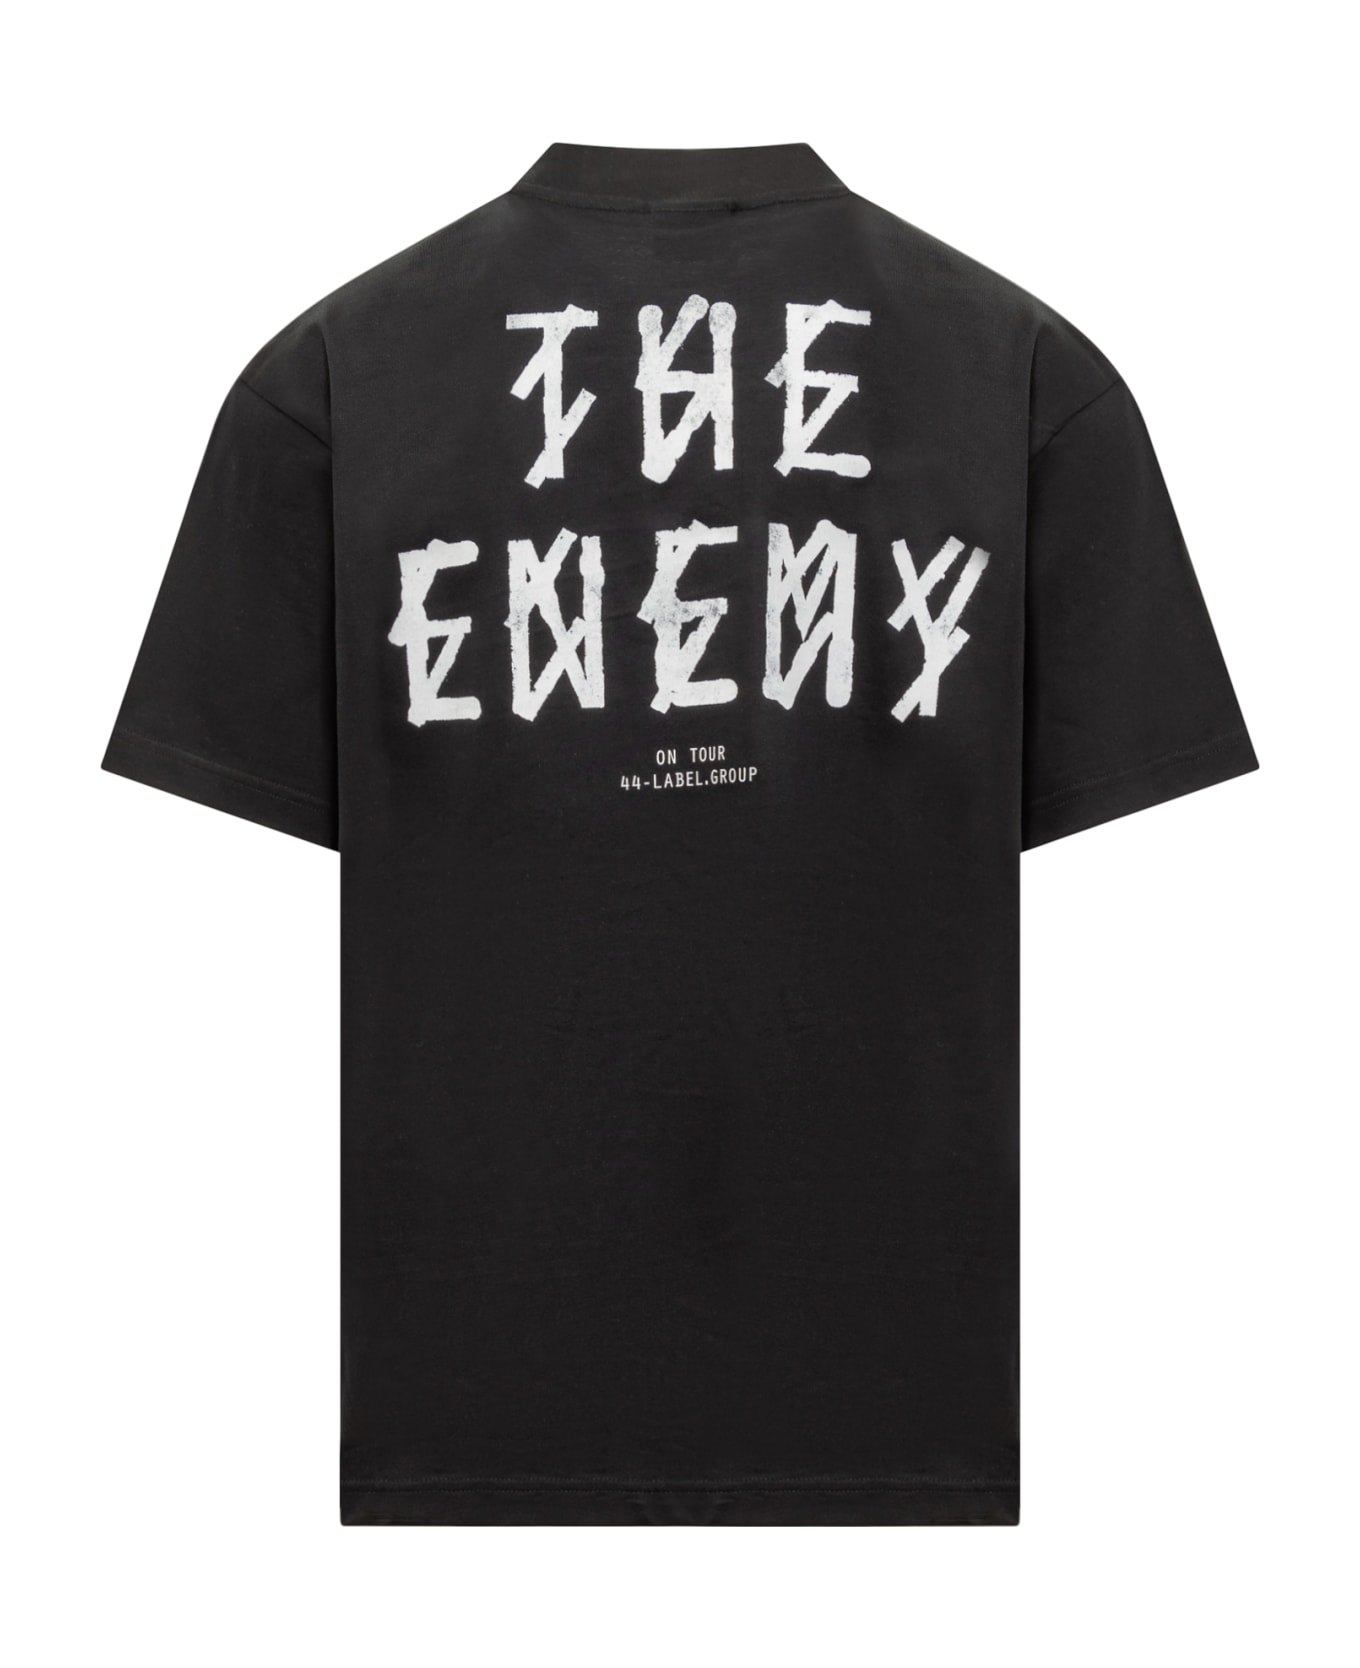 44 Label Group The Enemy T-shirt - BLACK-THE ENEMY PRINT